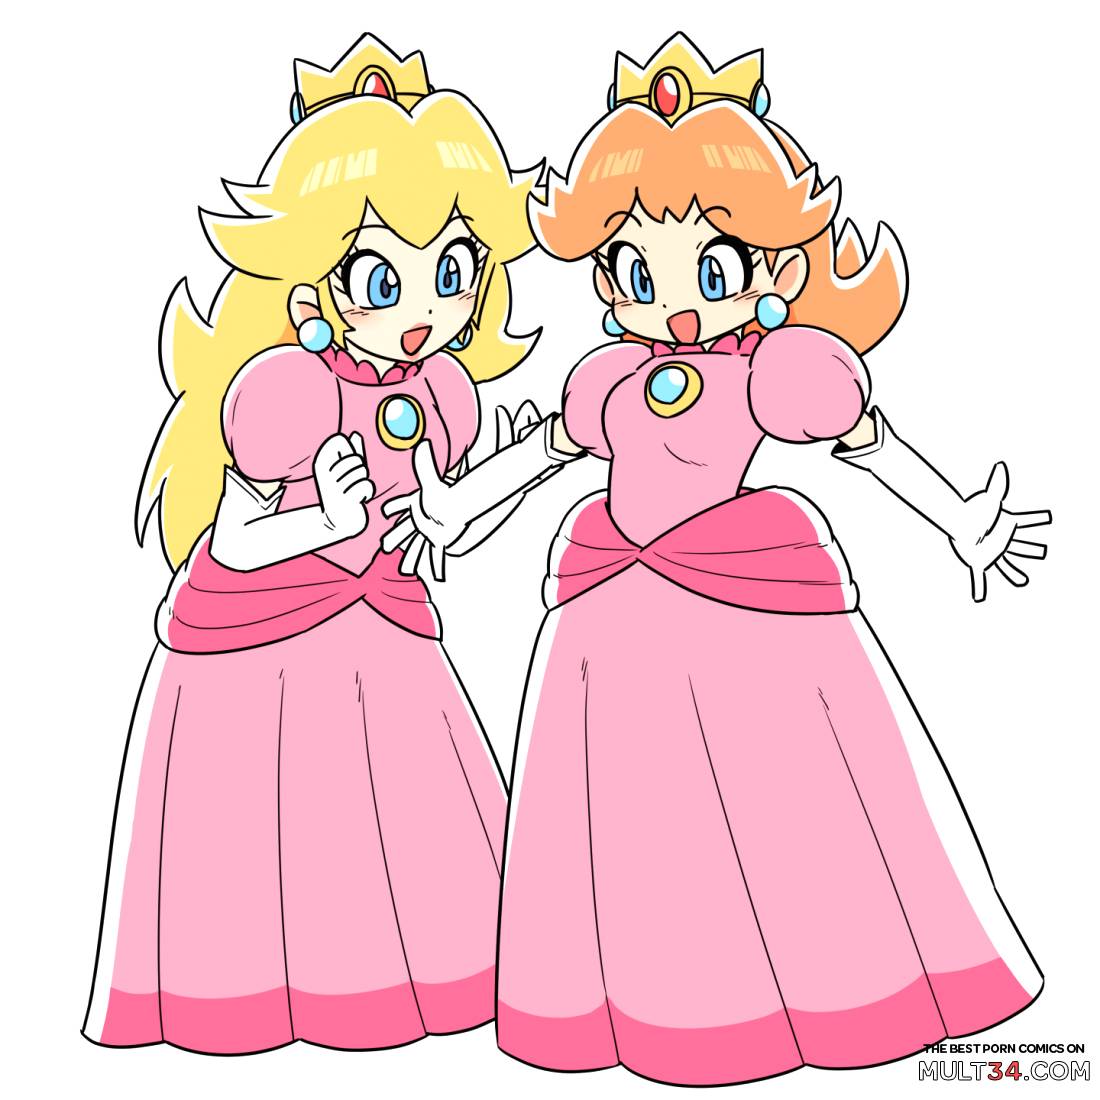 Peach and Daisy love page 12